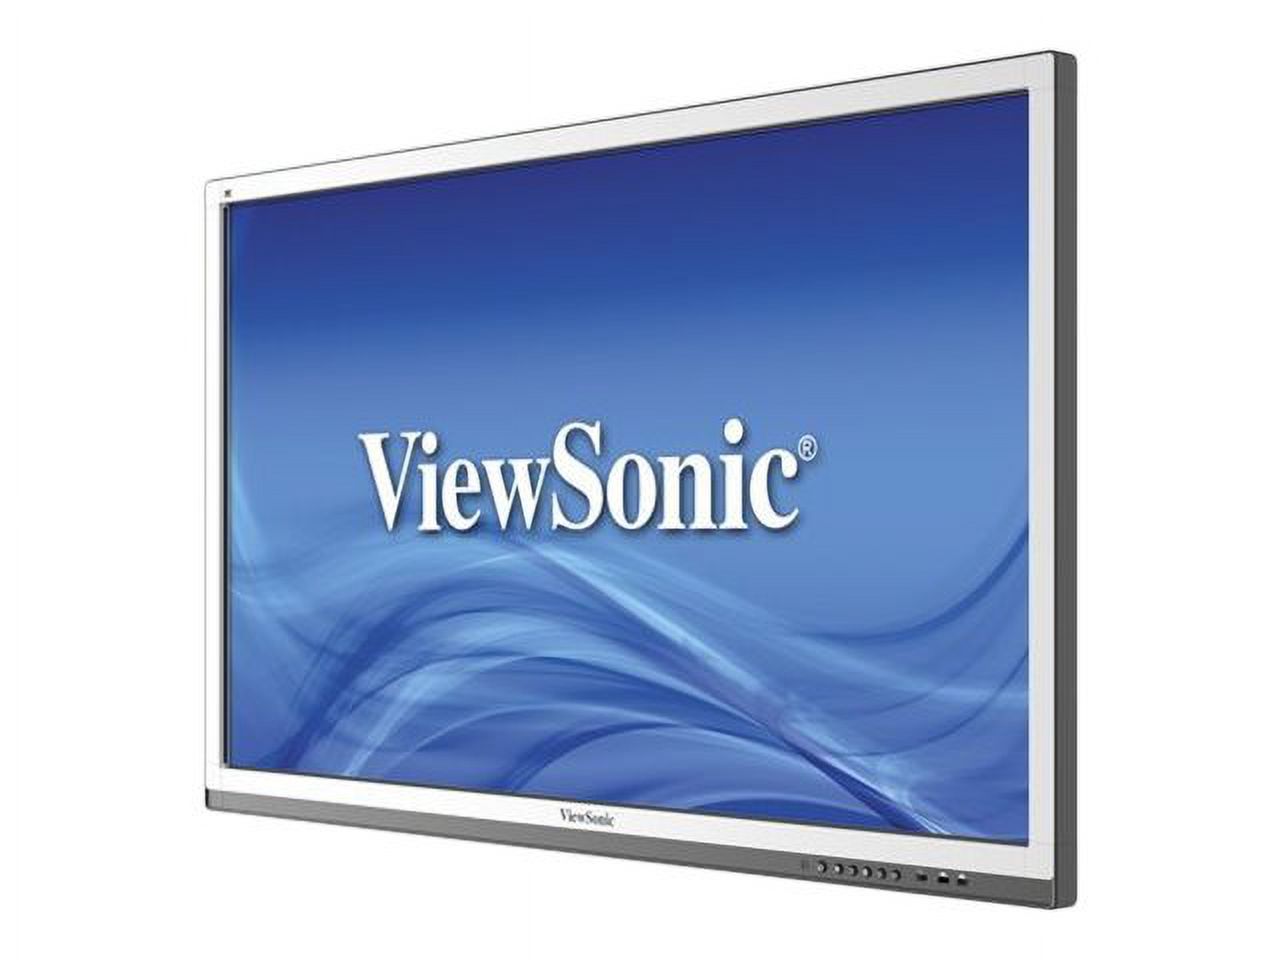 ViewSonic CDE5561T 55" Class (54.6" viewable) LED display - - image 2 of 7